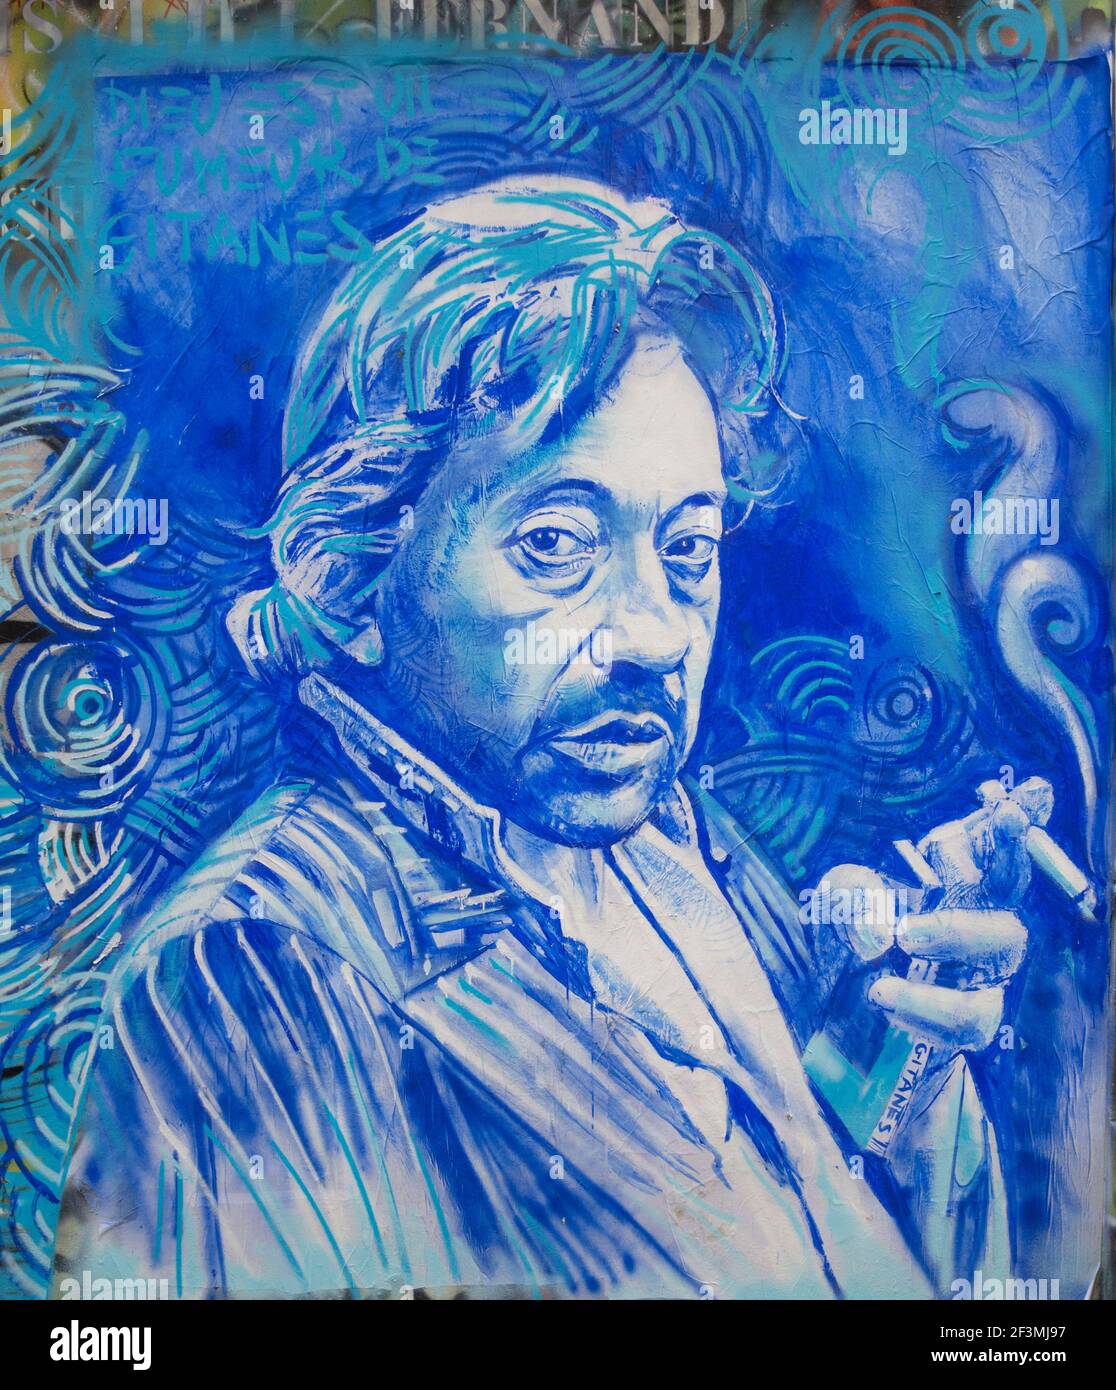 THE FRENCH PAINTER ERNESTO NOVO PAINTED A PORTRAIT OF SERGE GAINSBOURG ON THE WALL IN FRONT OF HIS HOUSE IN PARIS Stock Photo